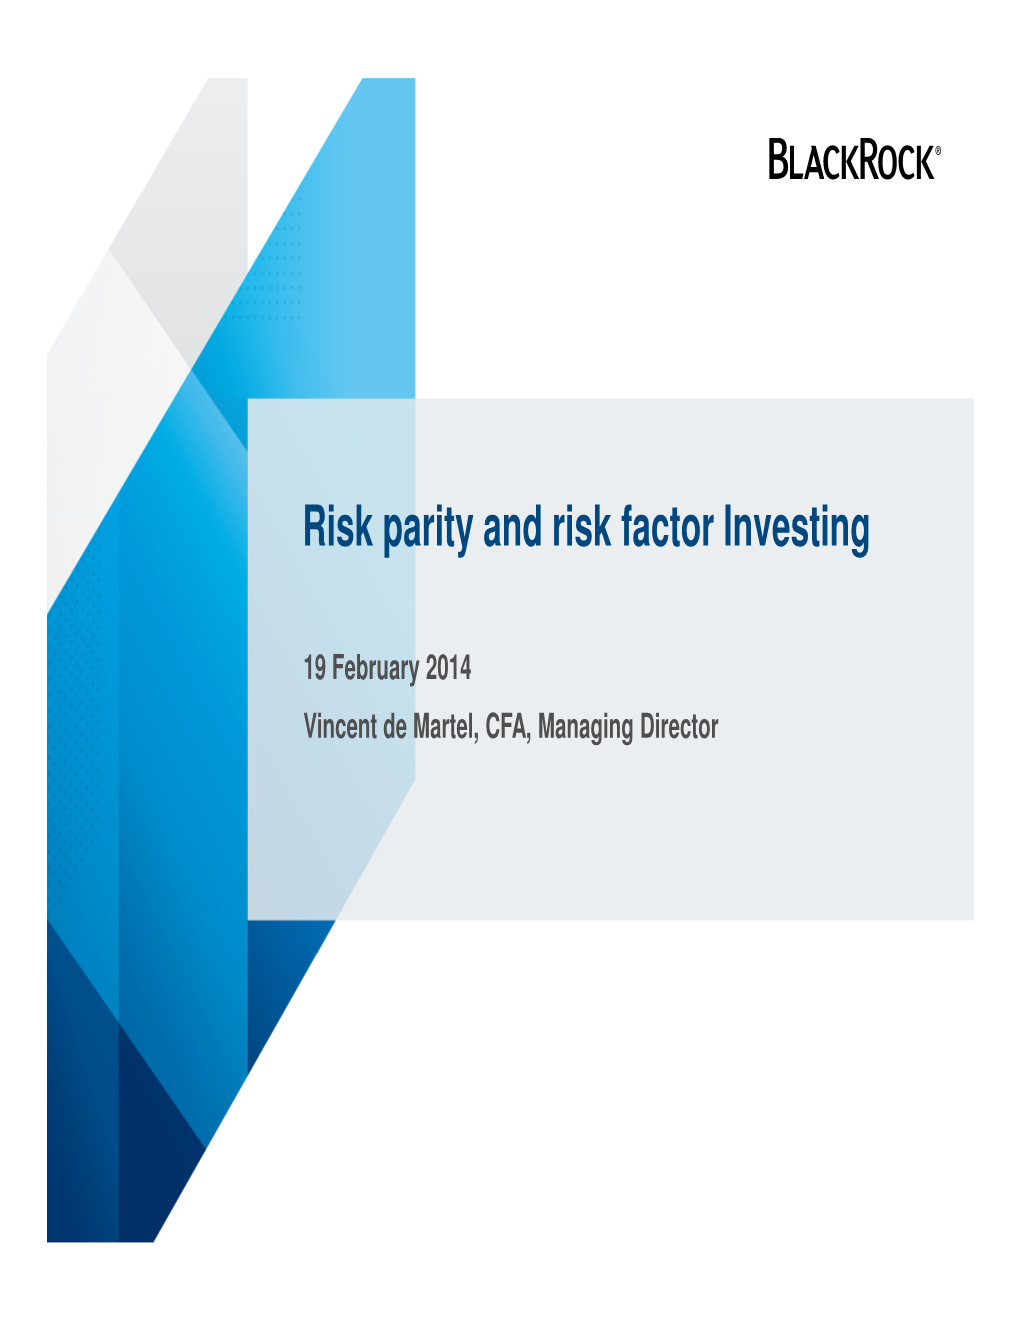 Risk Parity and Risk Factor Investing